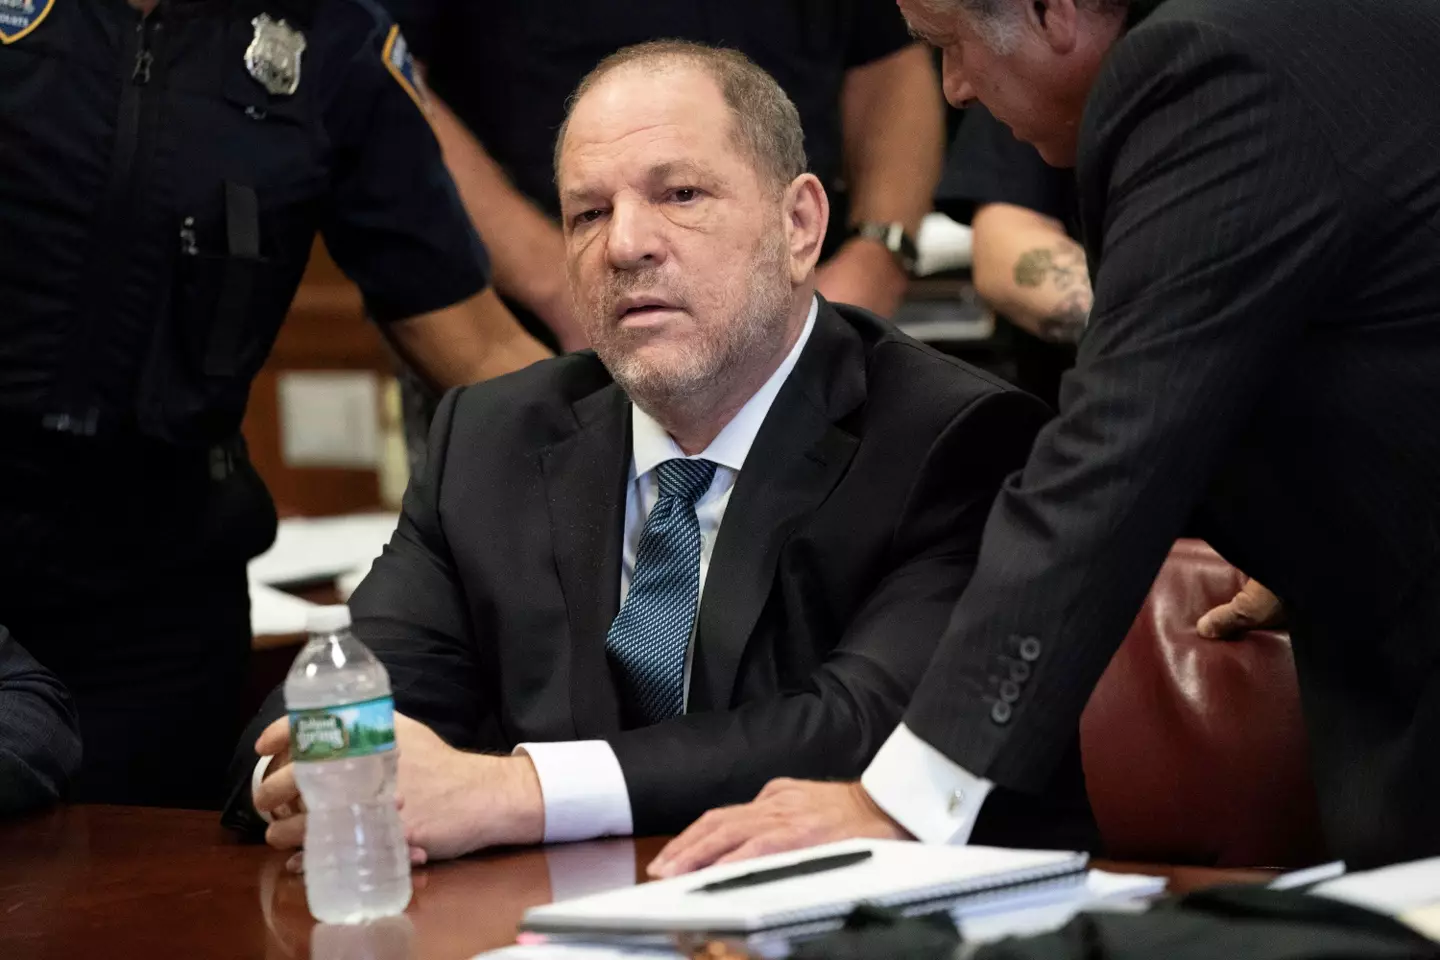 Harvey Weinstein is already serving a 23-year sentence for the rape and sexual assault.